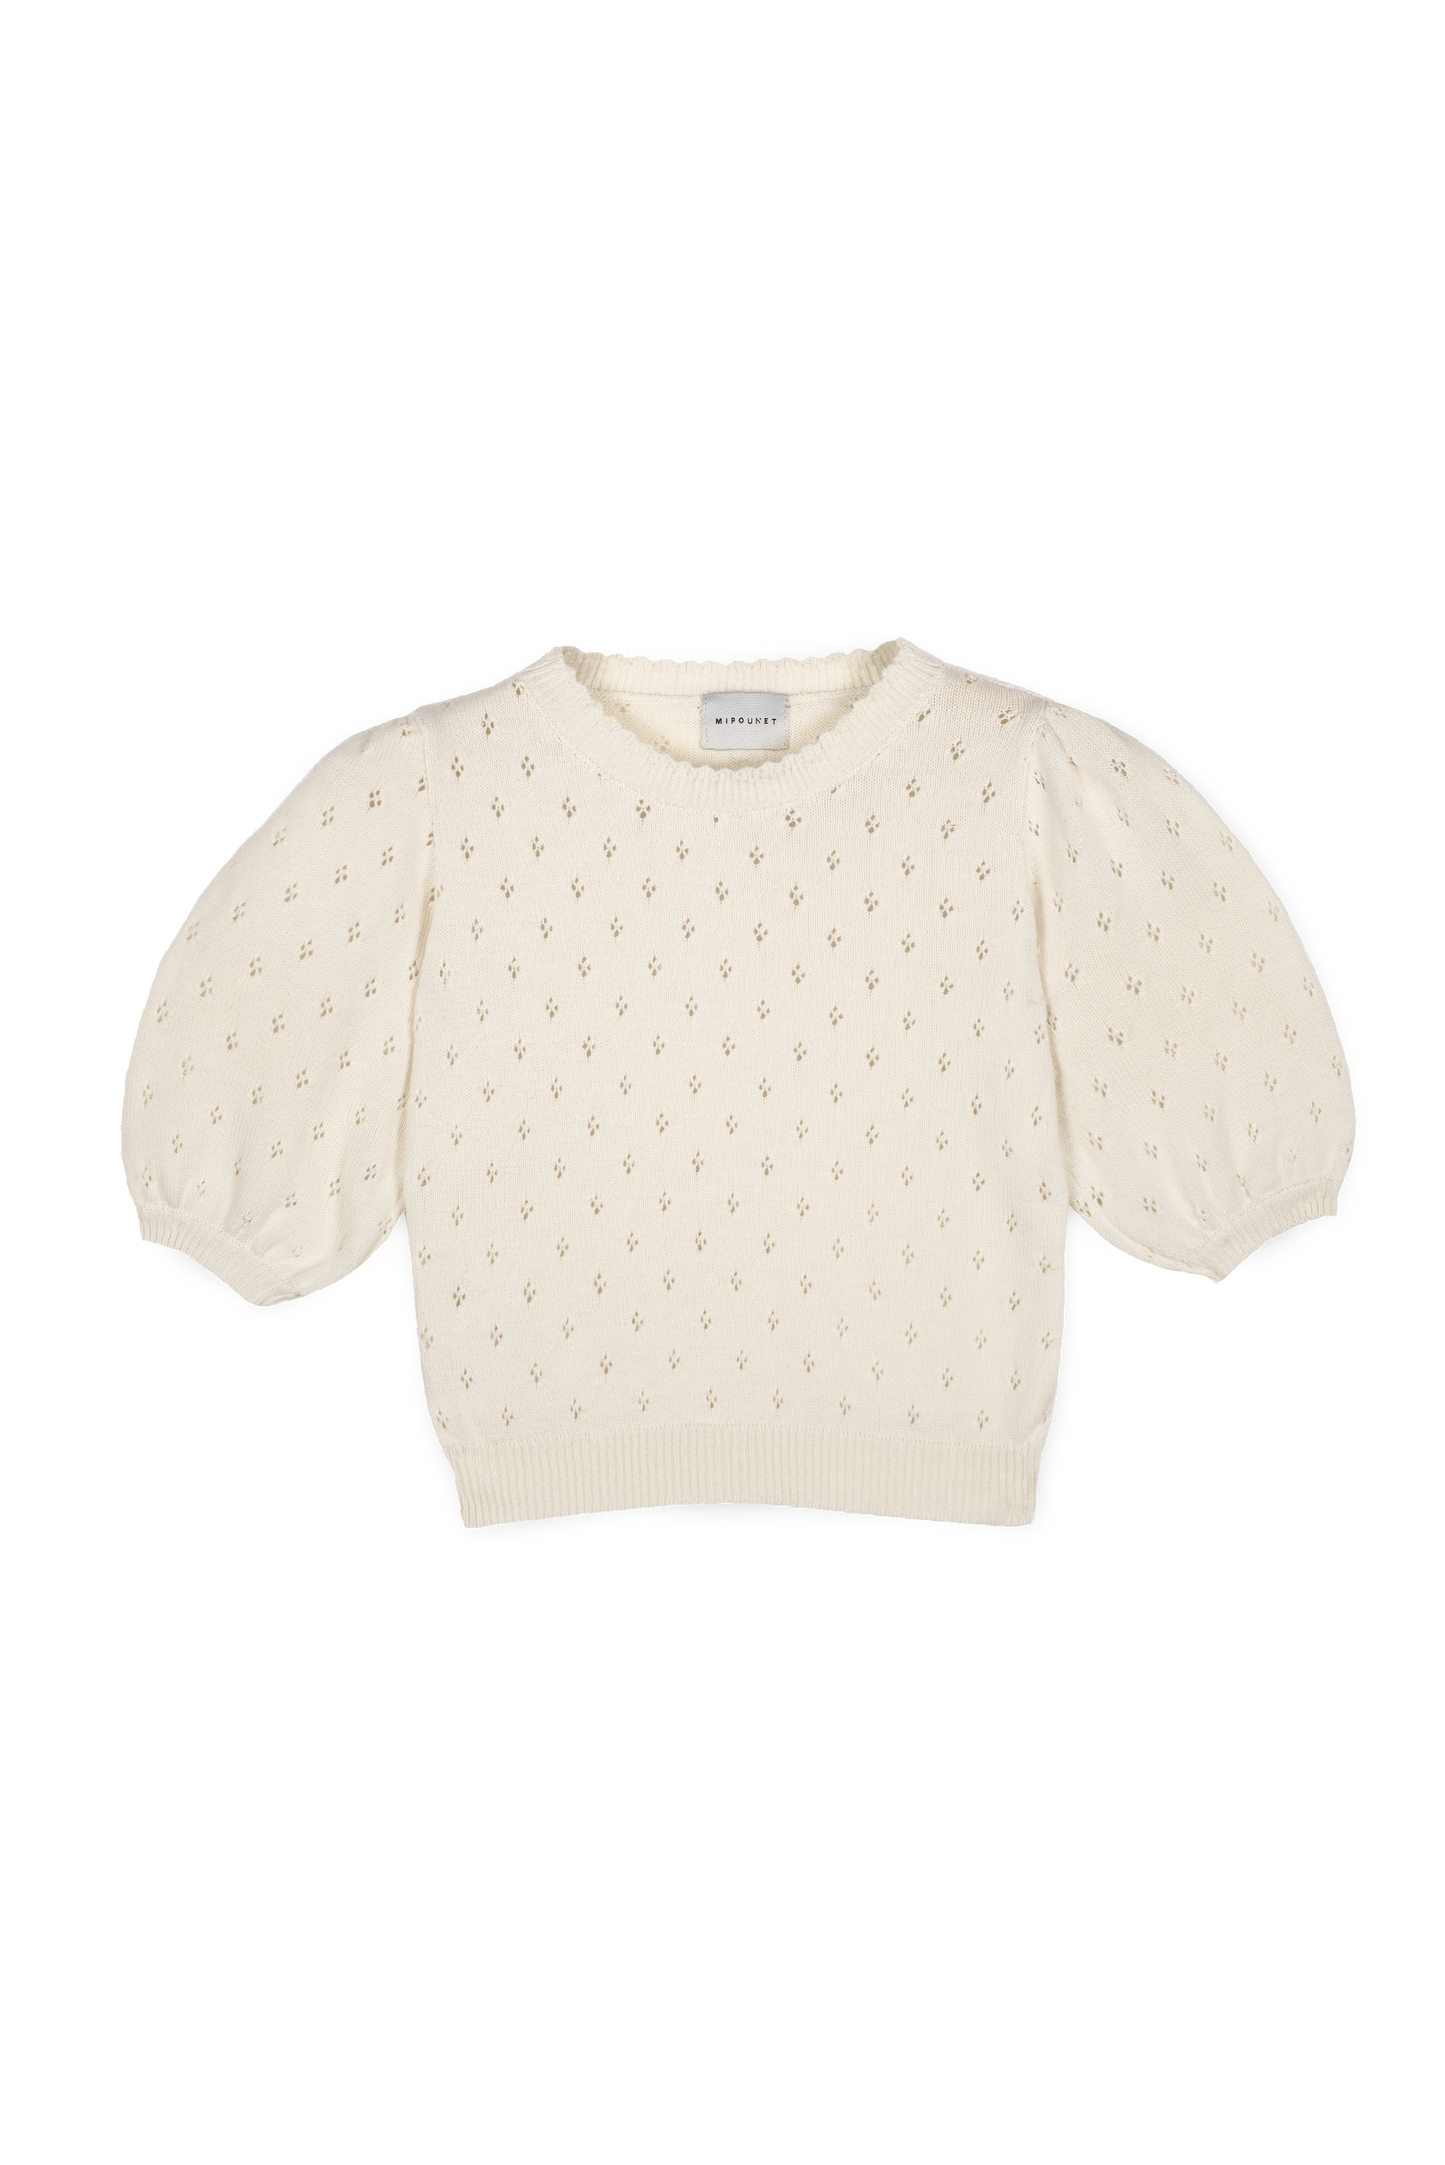 Mipounet Sweater Top